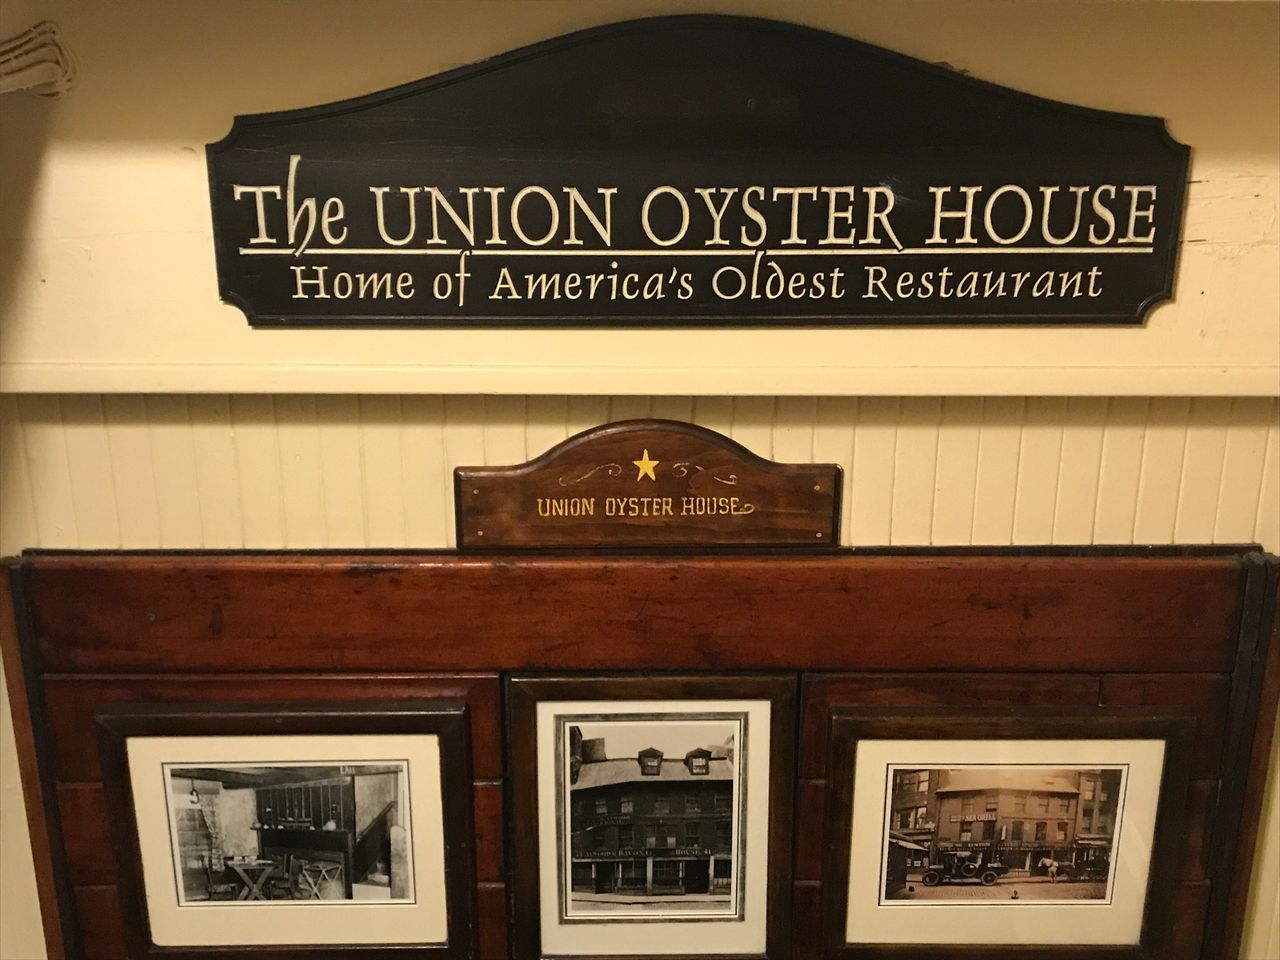 The Union Oyster House - Home of America's Oldest Restaurant